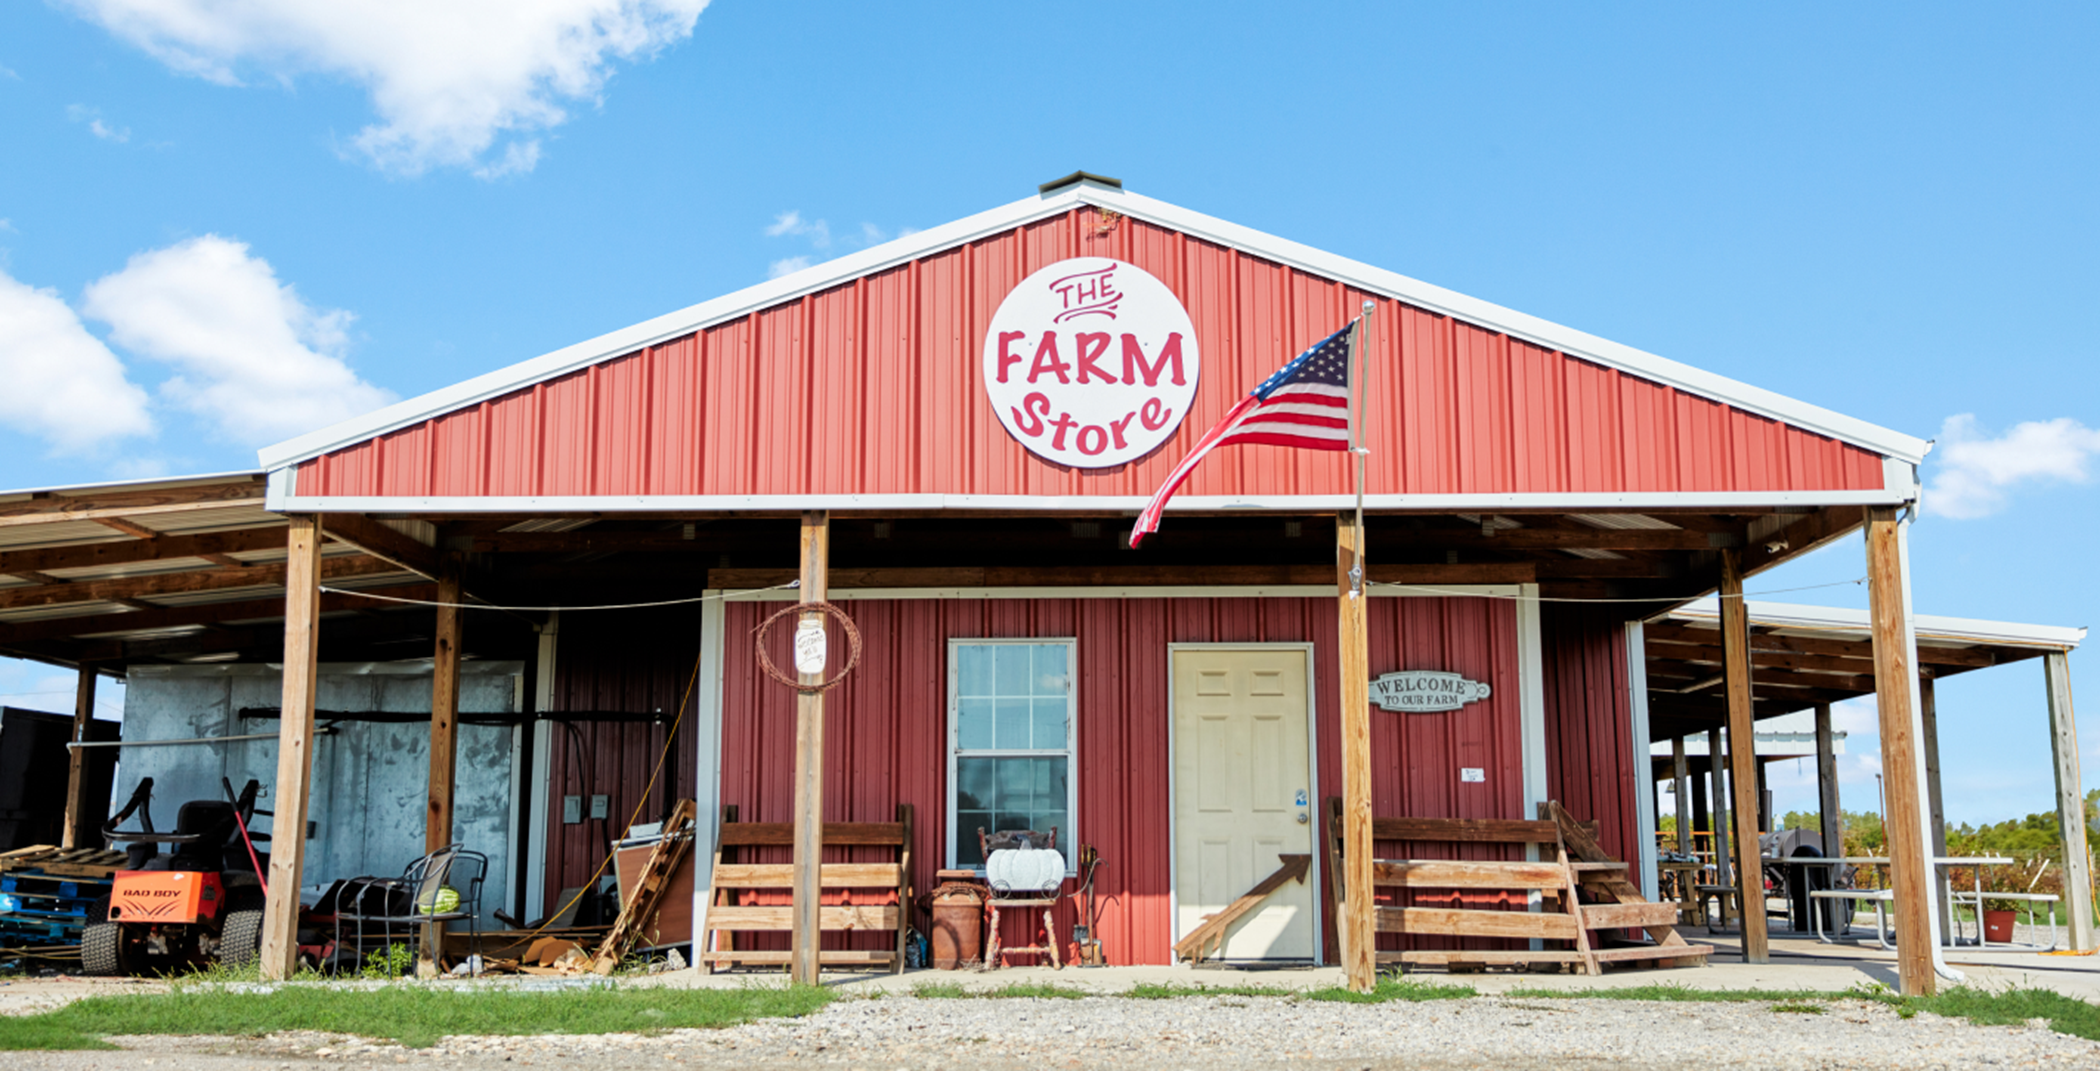 Reeves Family Farm Store nearby